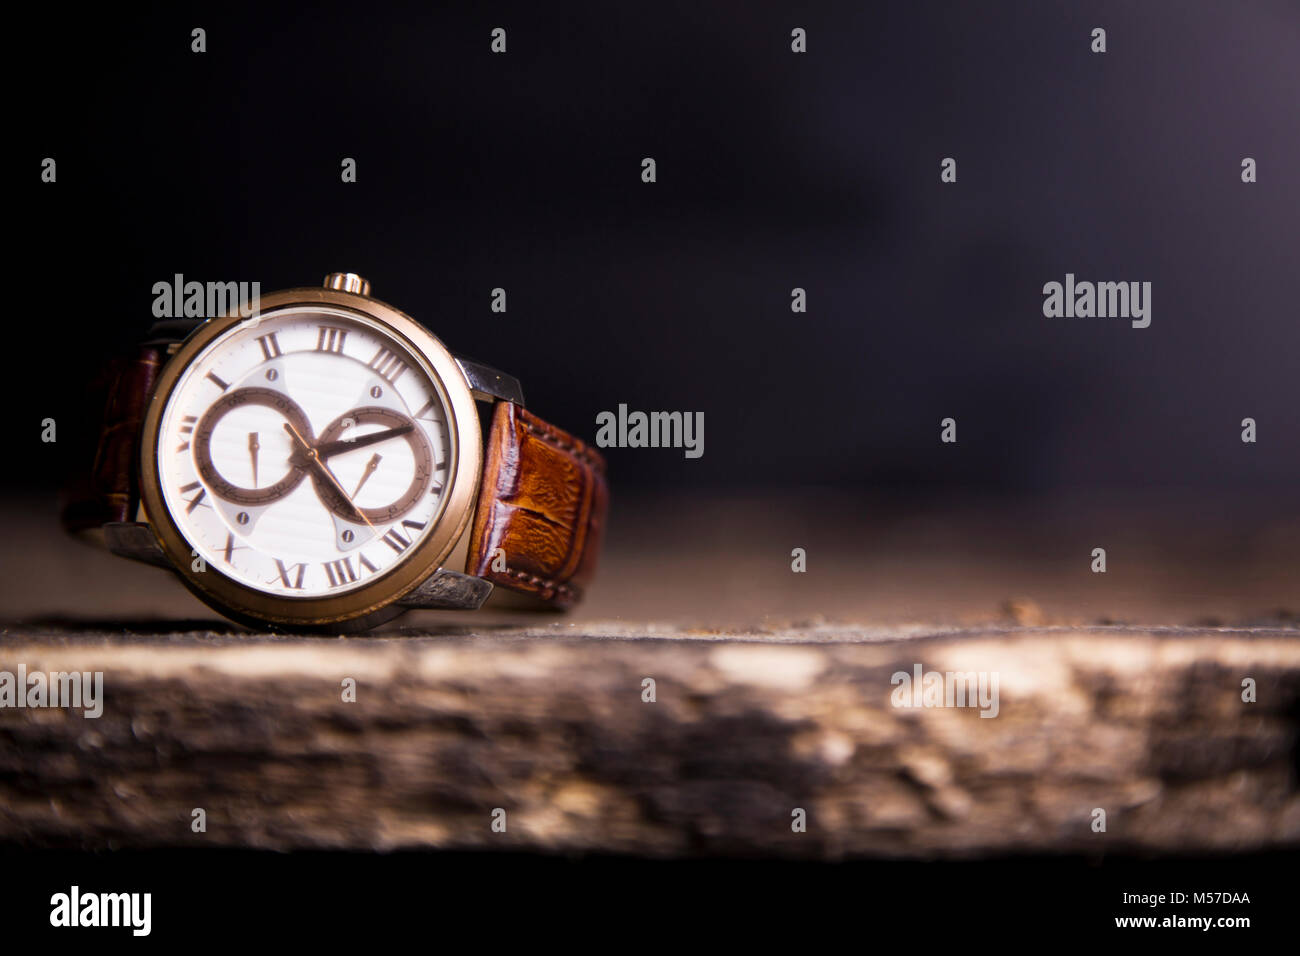 Brown  LEATHER WATCH, VINTAGE STYLE WRIST WATCH, MEN'S LEATHER WATCH on wooden background blur. Stock Photo